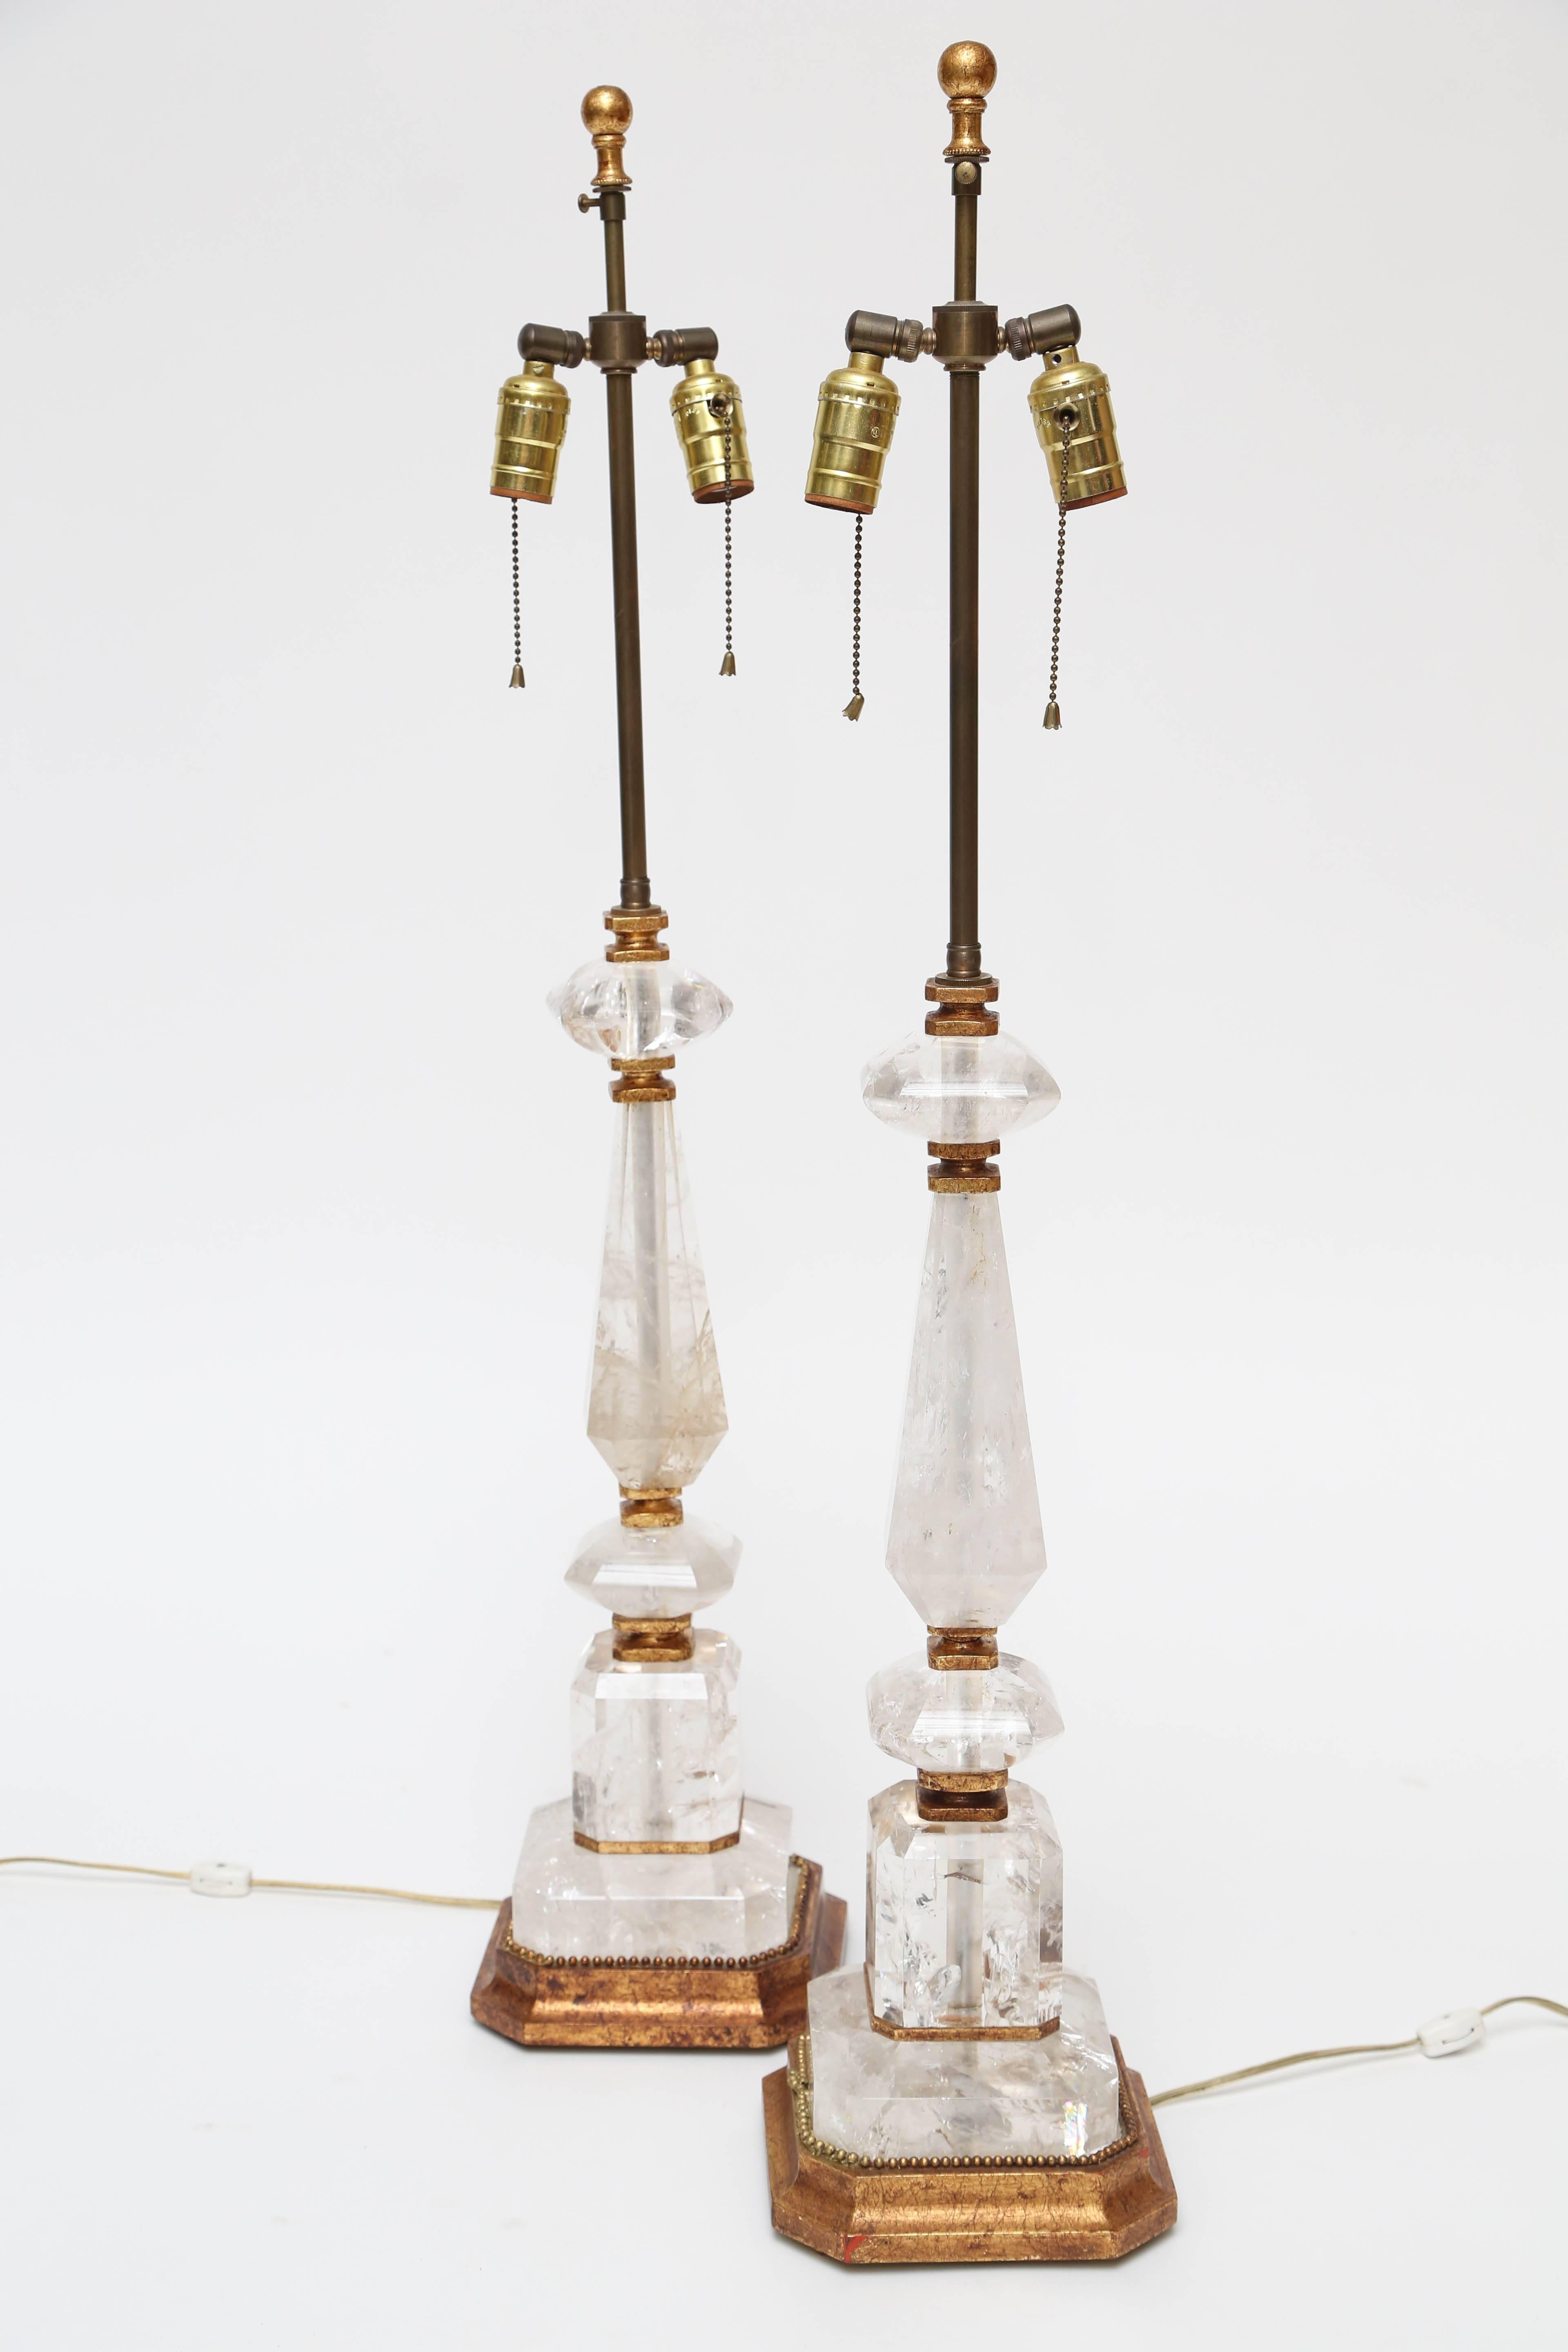 Pair of Rock crystal lamps with gilt fittings.